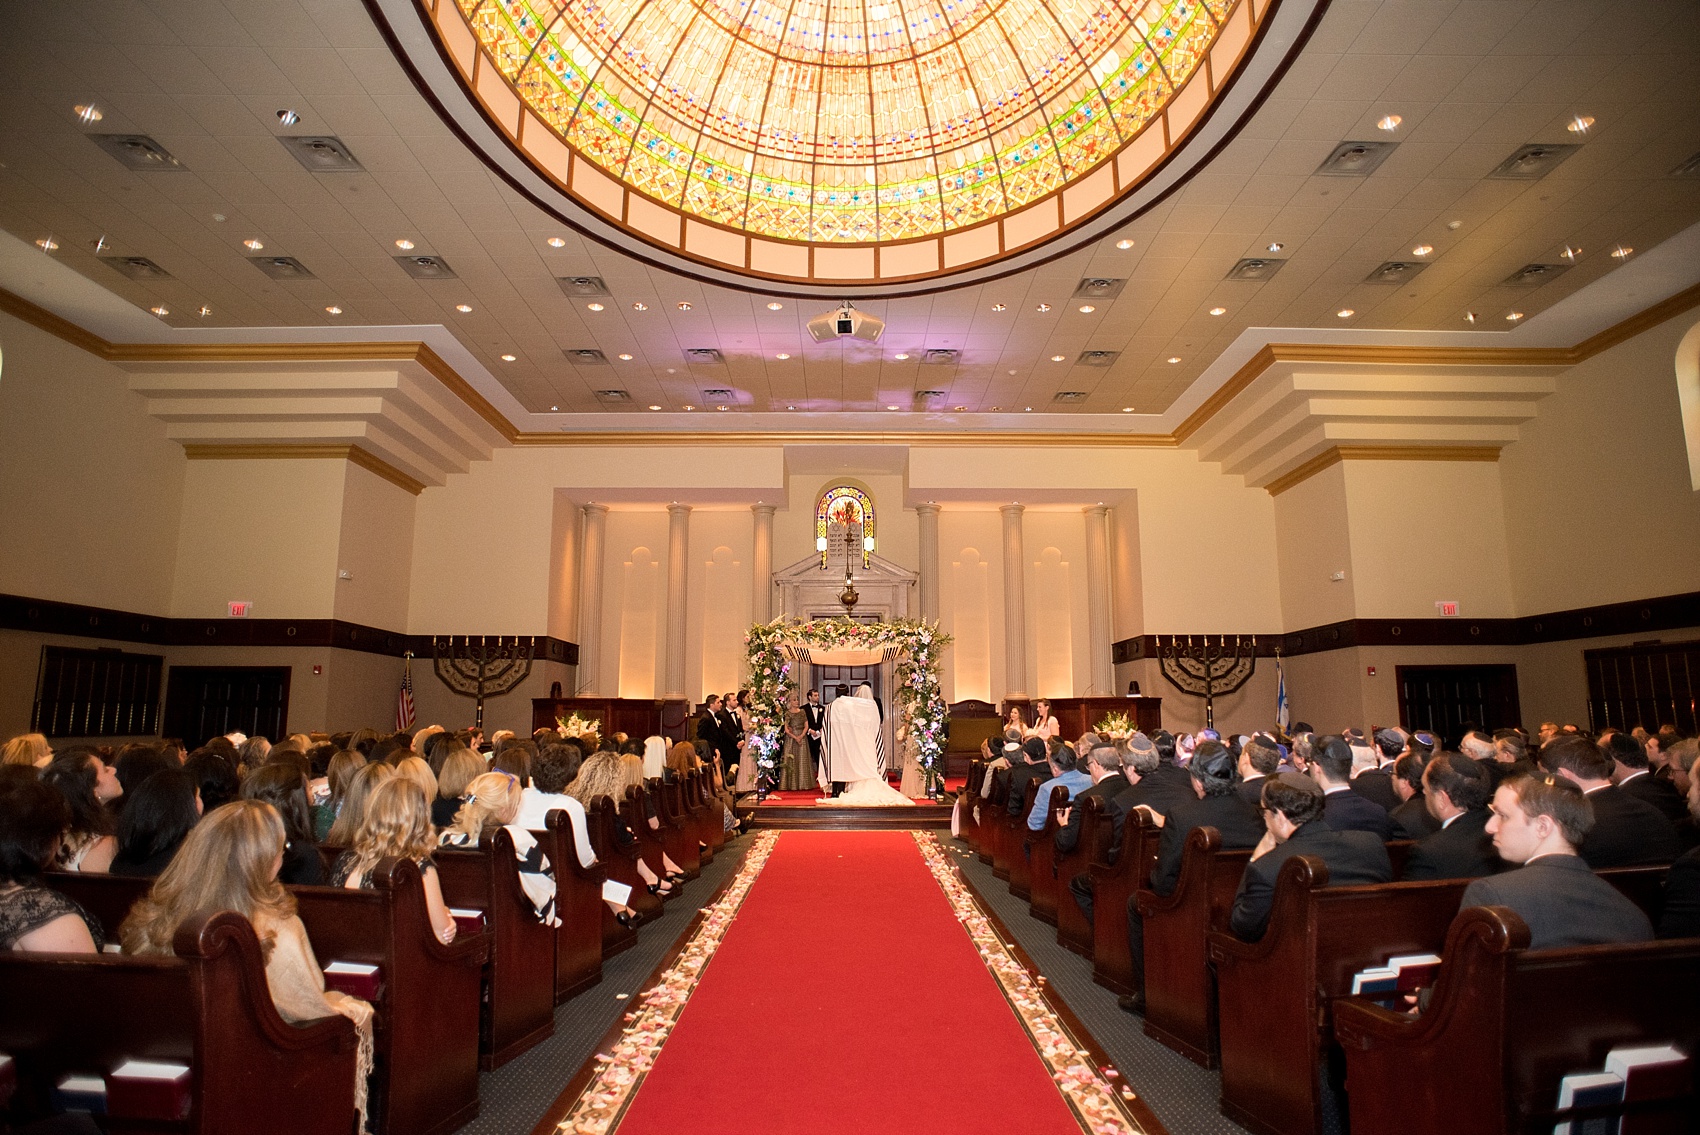 Mikkel Paige Photography photo of a synagogue wedding ceremony at Temple Emanu-El in Closter, NJ. 